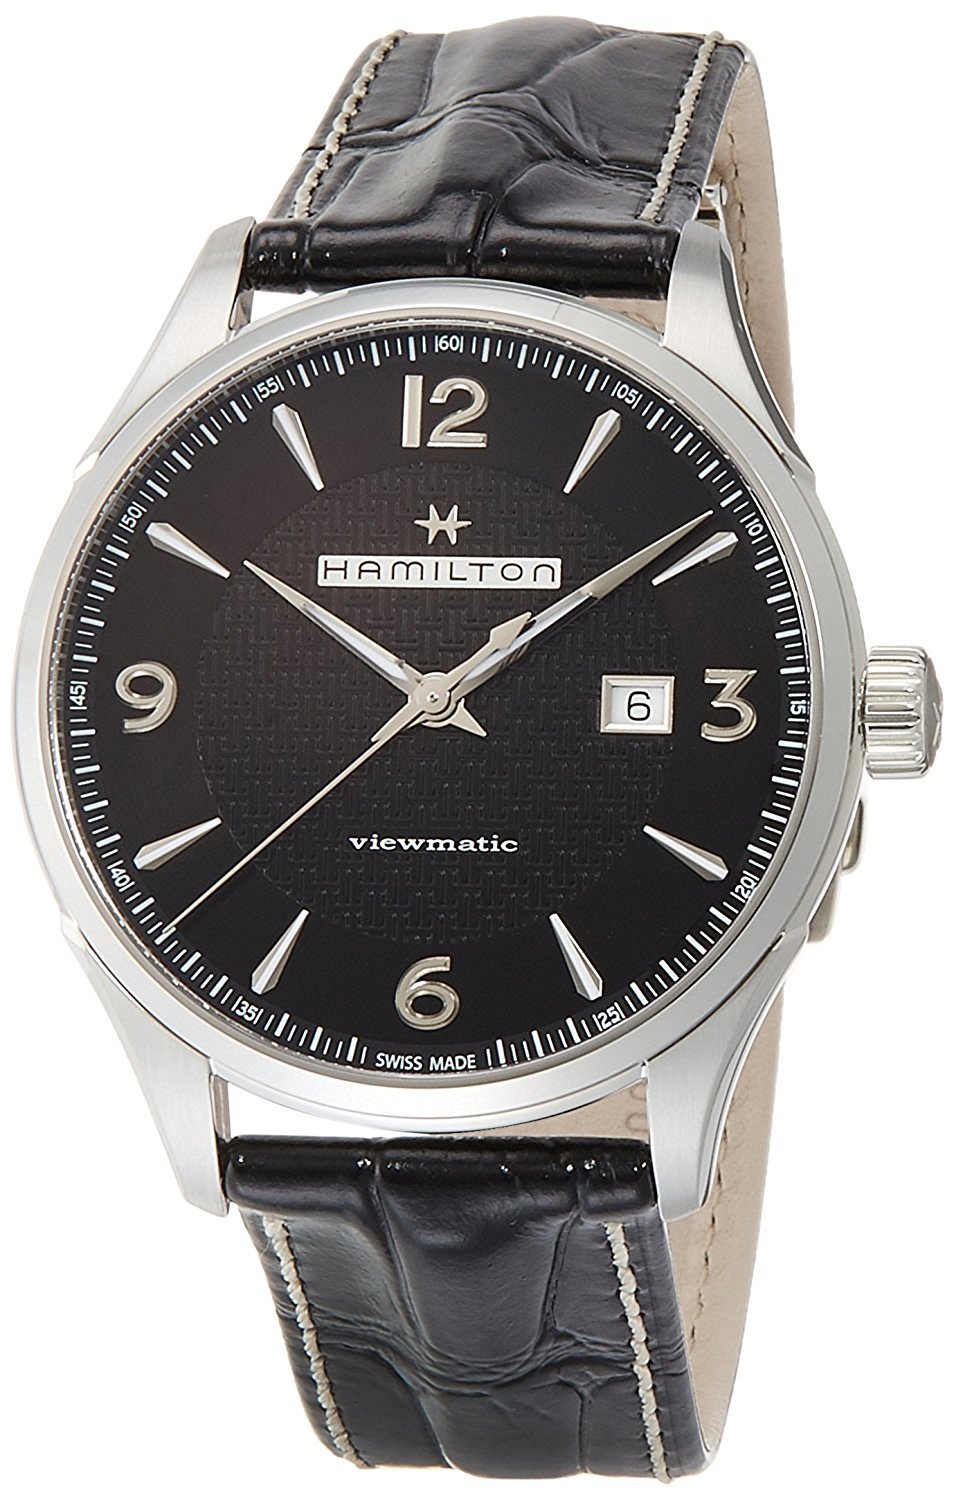 Hamilton Men's H32755731 Jazzmaster Viewmatic 44mm Automatic Watch